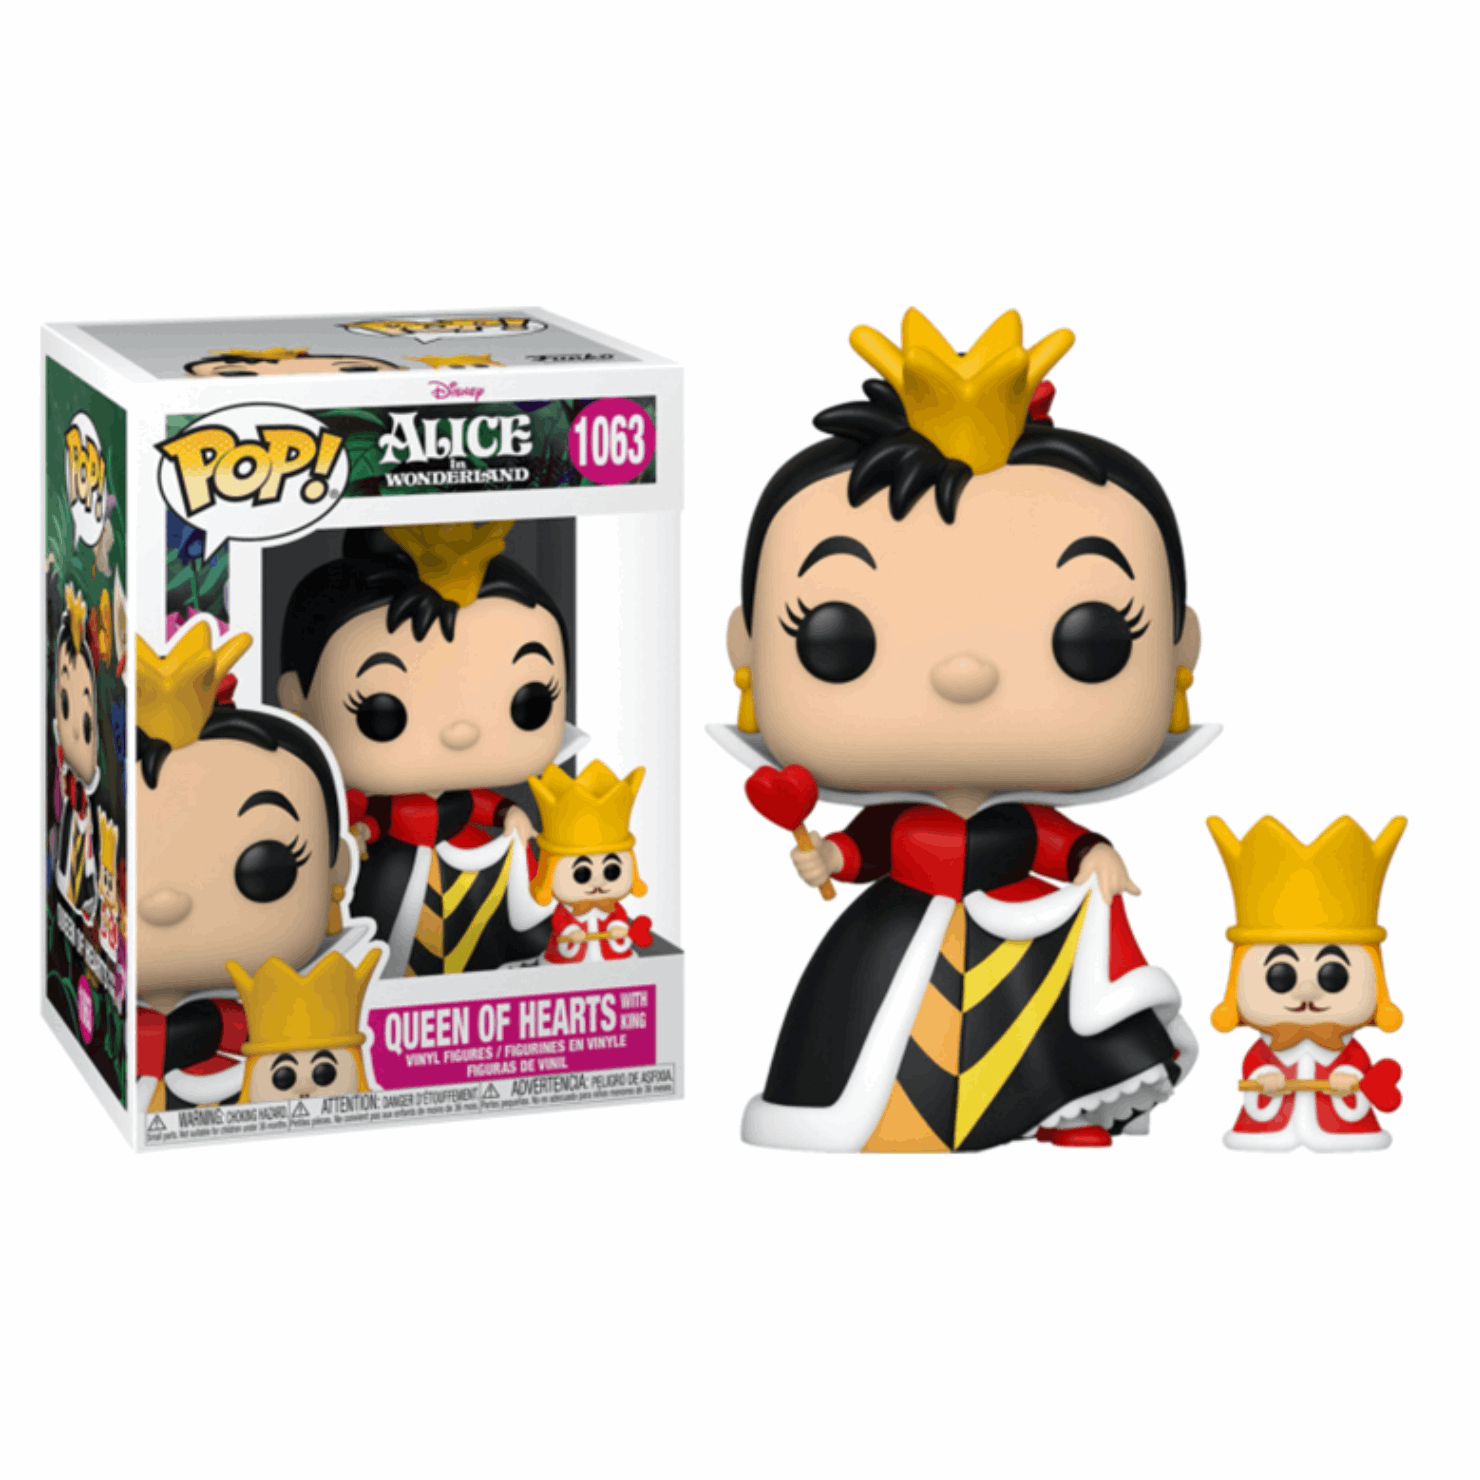 Alice in wonderland - Queen of hearts (and the king) 70th anniversary Pop! toy